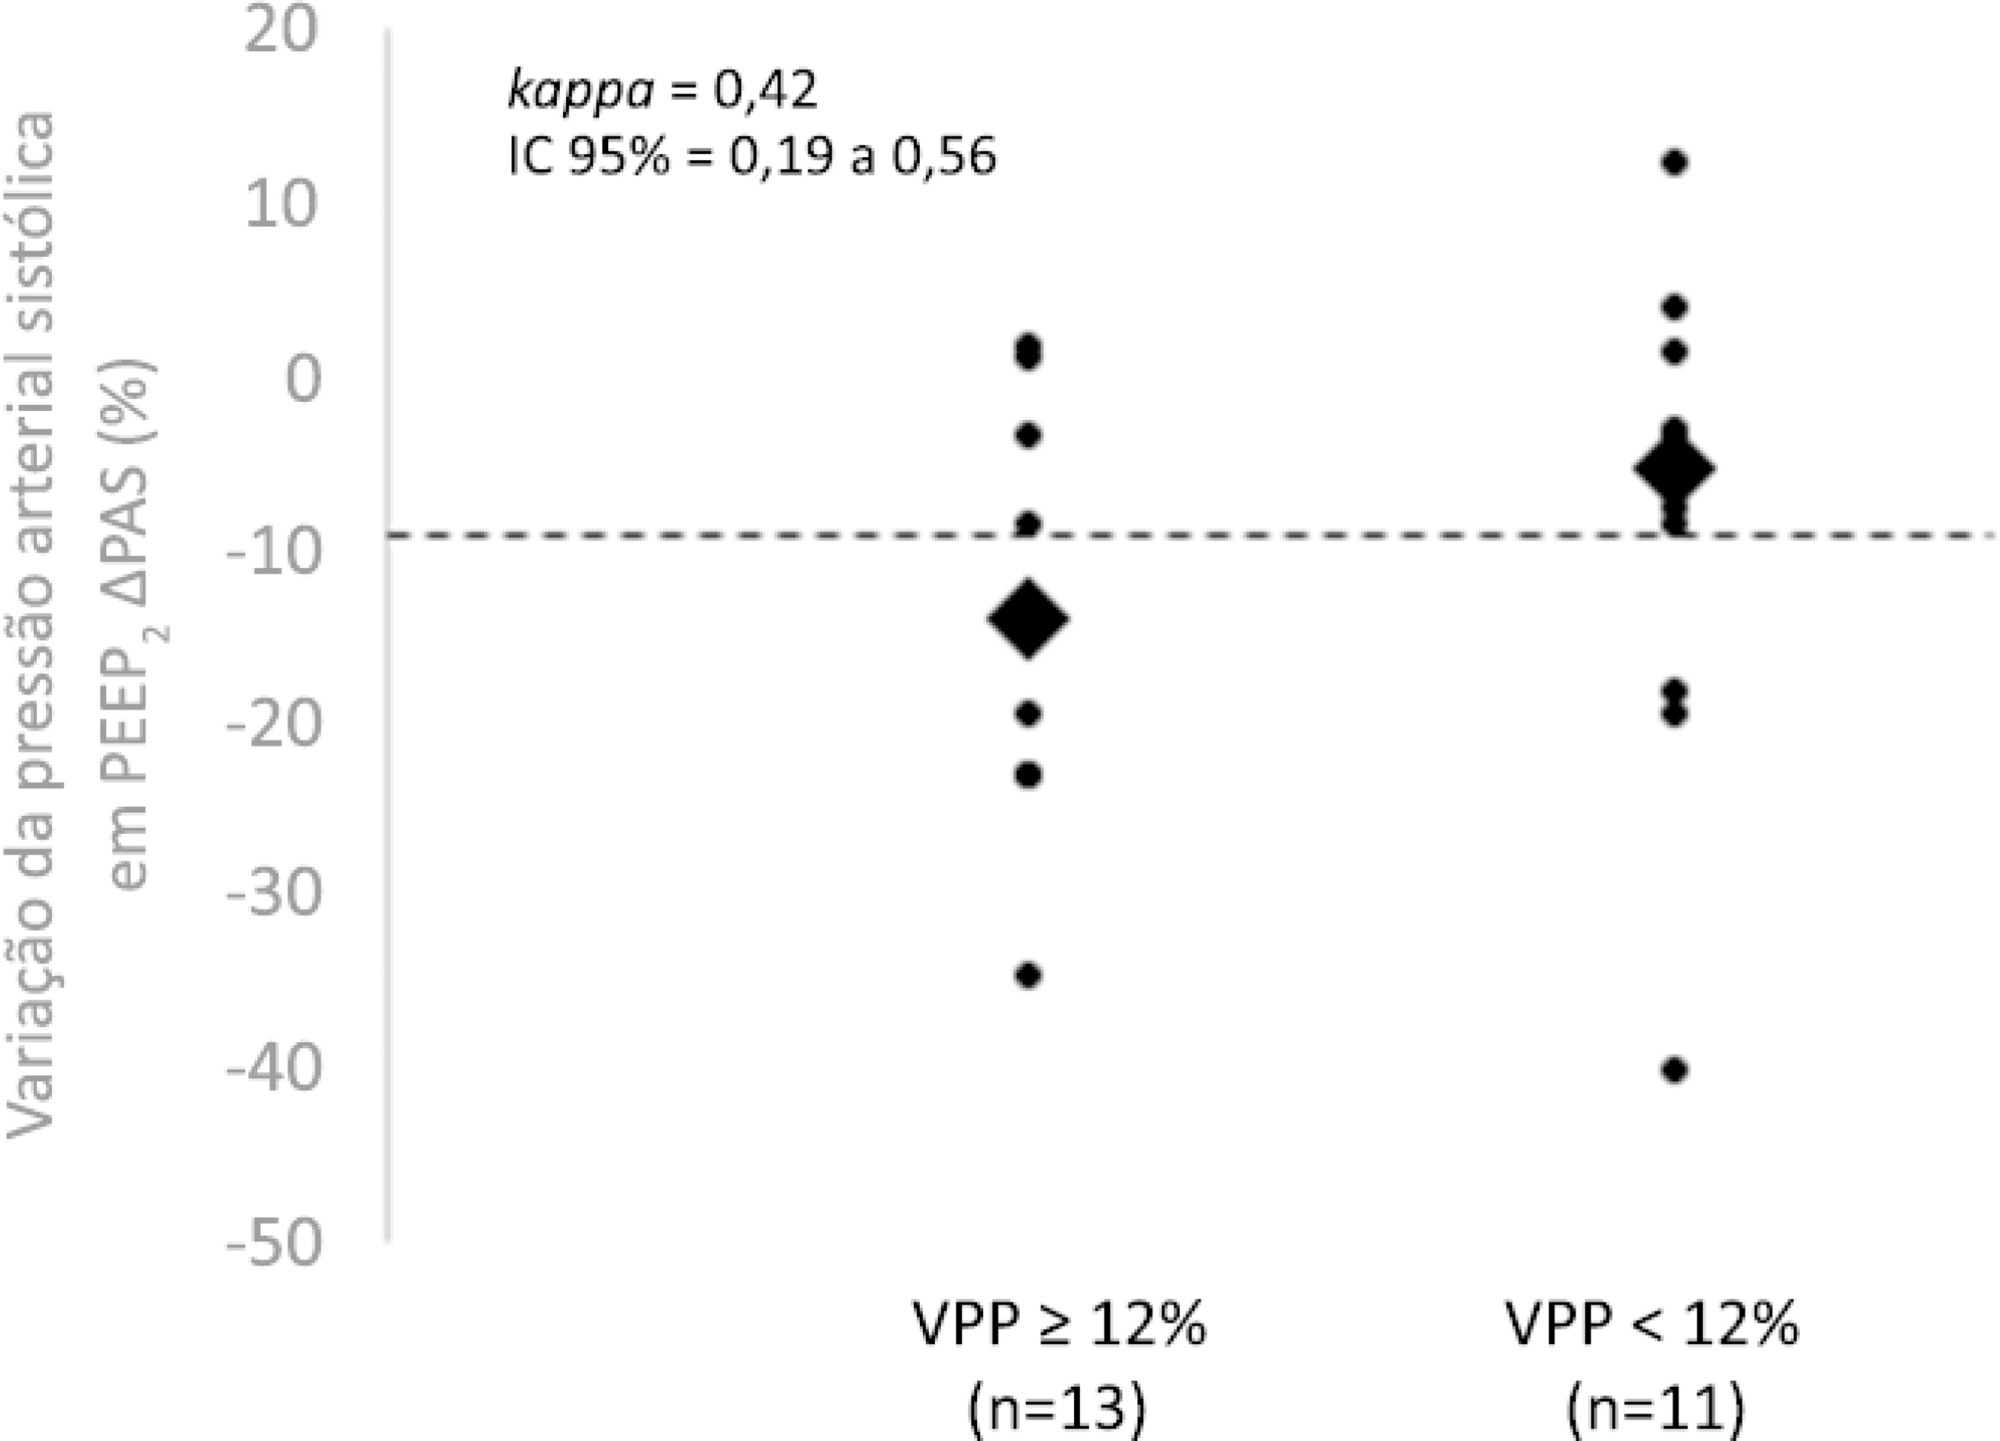 Can the behavior of blood pressure after elevation of the positive end-expiratory pressure help to determine the fluid responsiveness status in patients with septic shock?